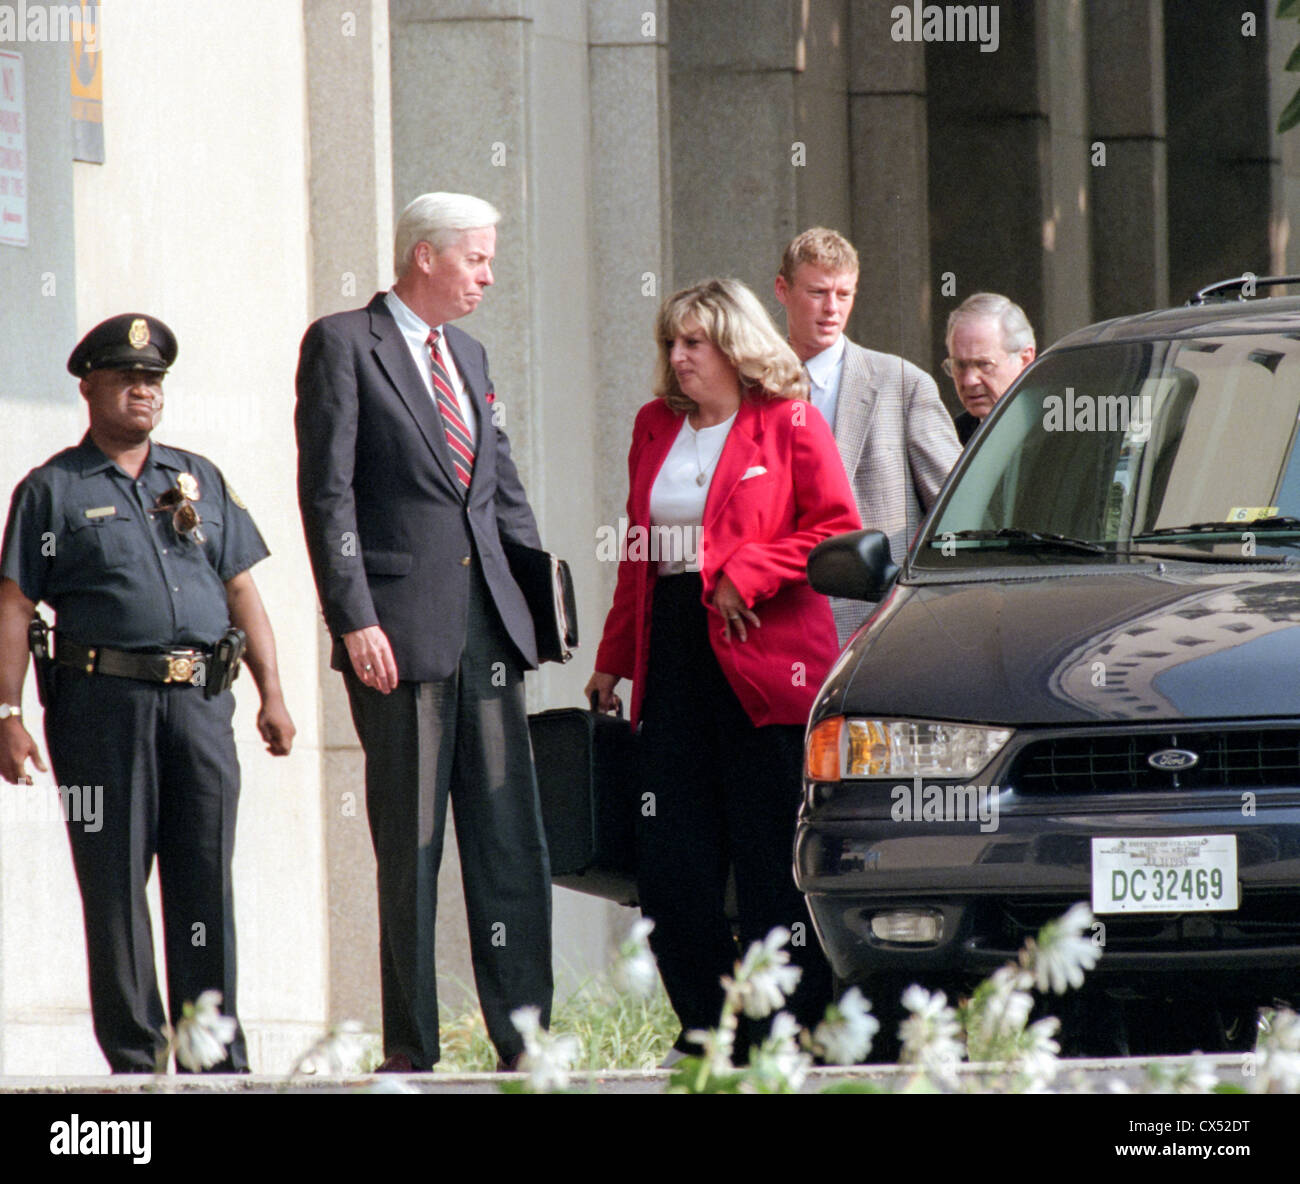 Star witness Linda Tripp enters the Federal Courthouse July 28, 1998 in Washington, DC. Tripp is testifying before Kenneth Starr's grand jury investigating an alleged presidential affair. Stock Photo